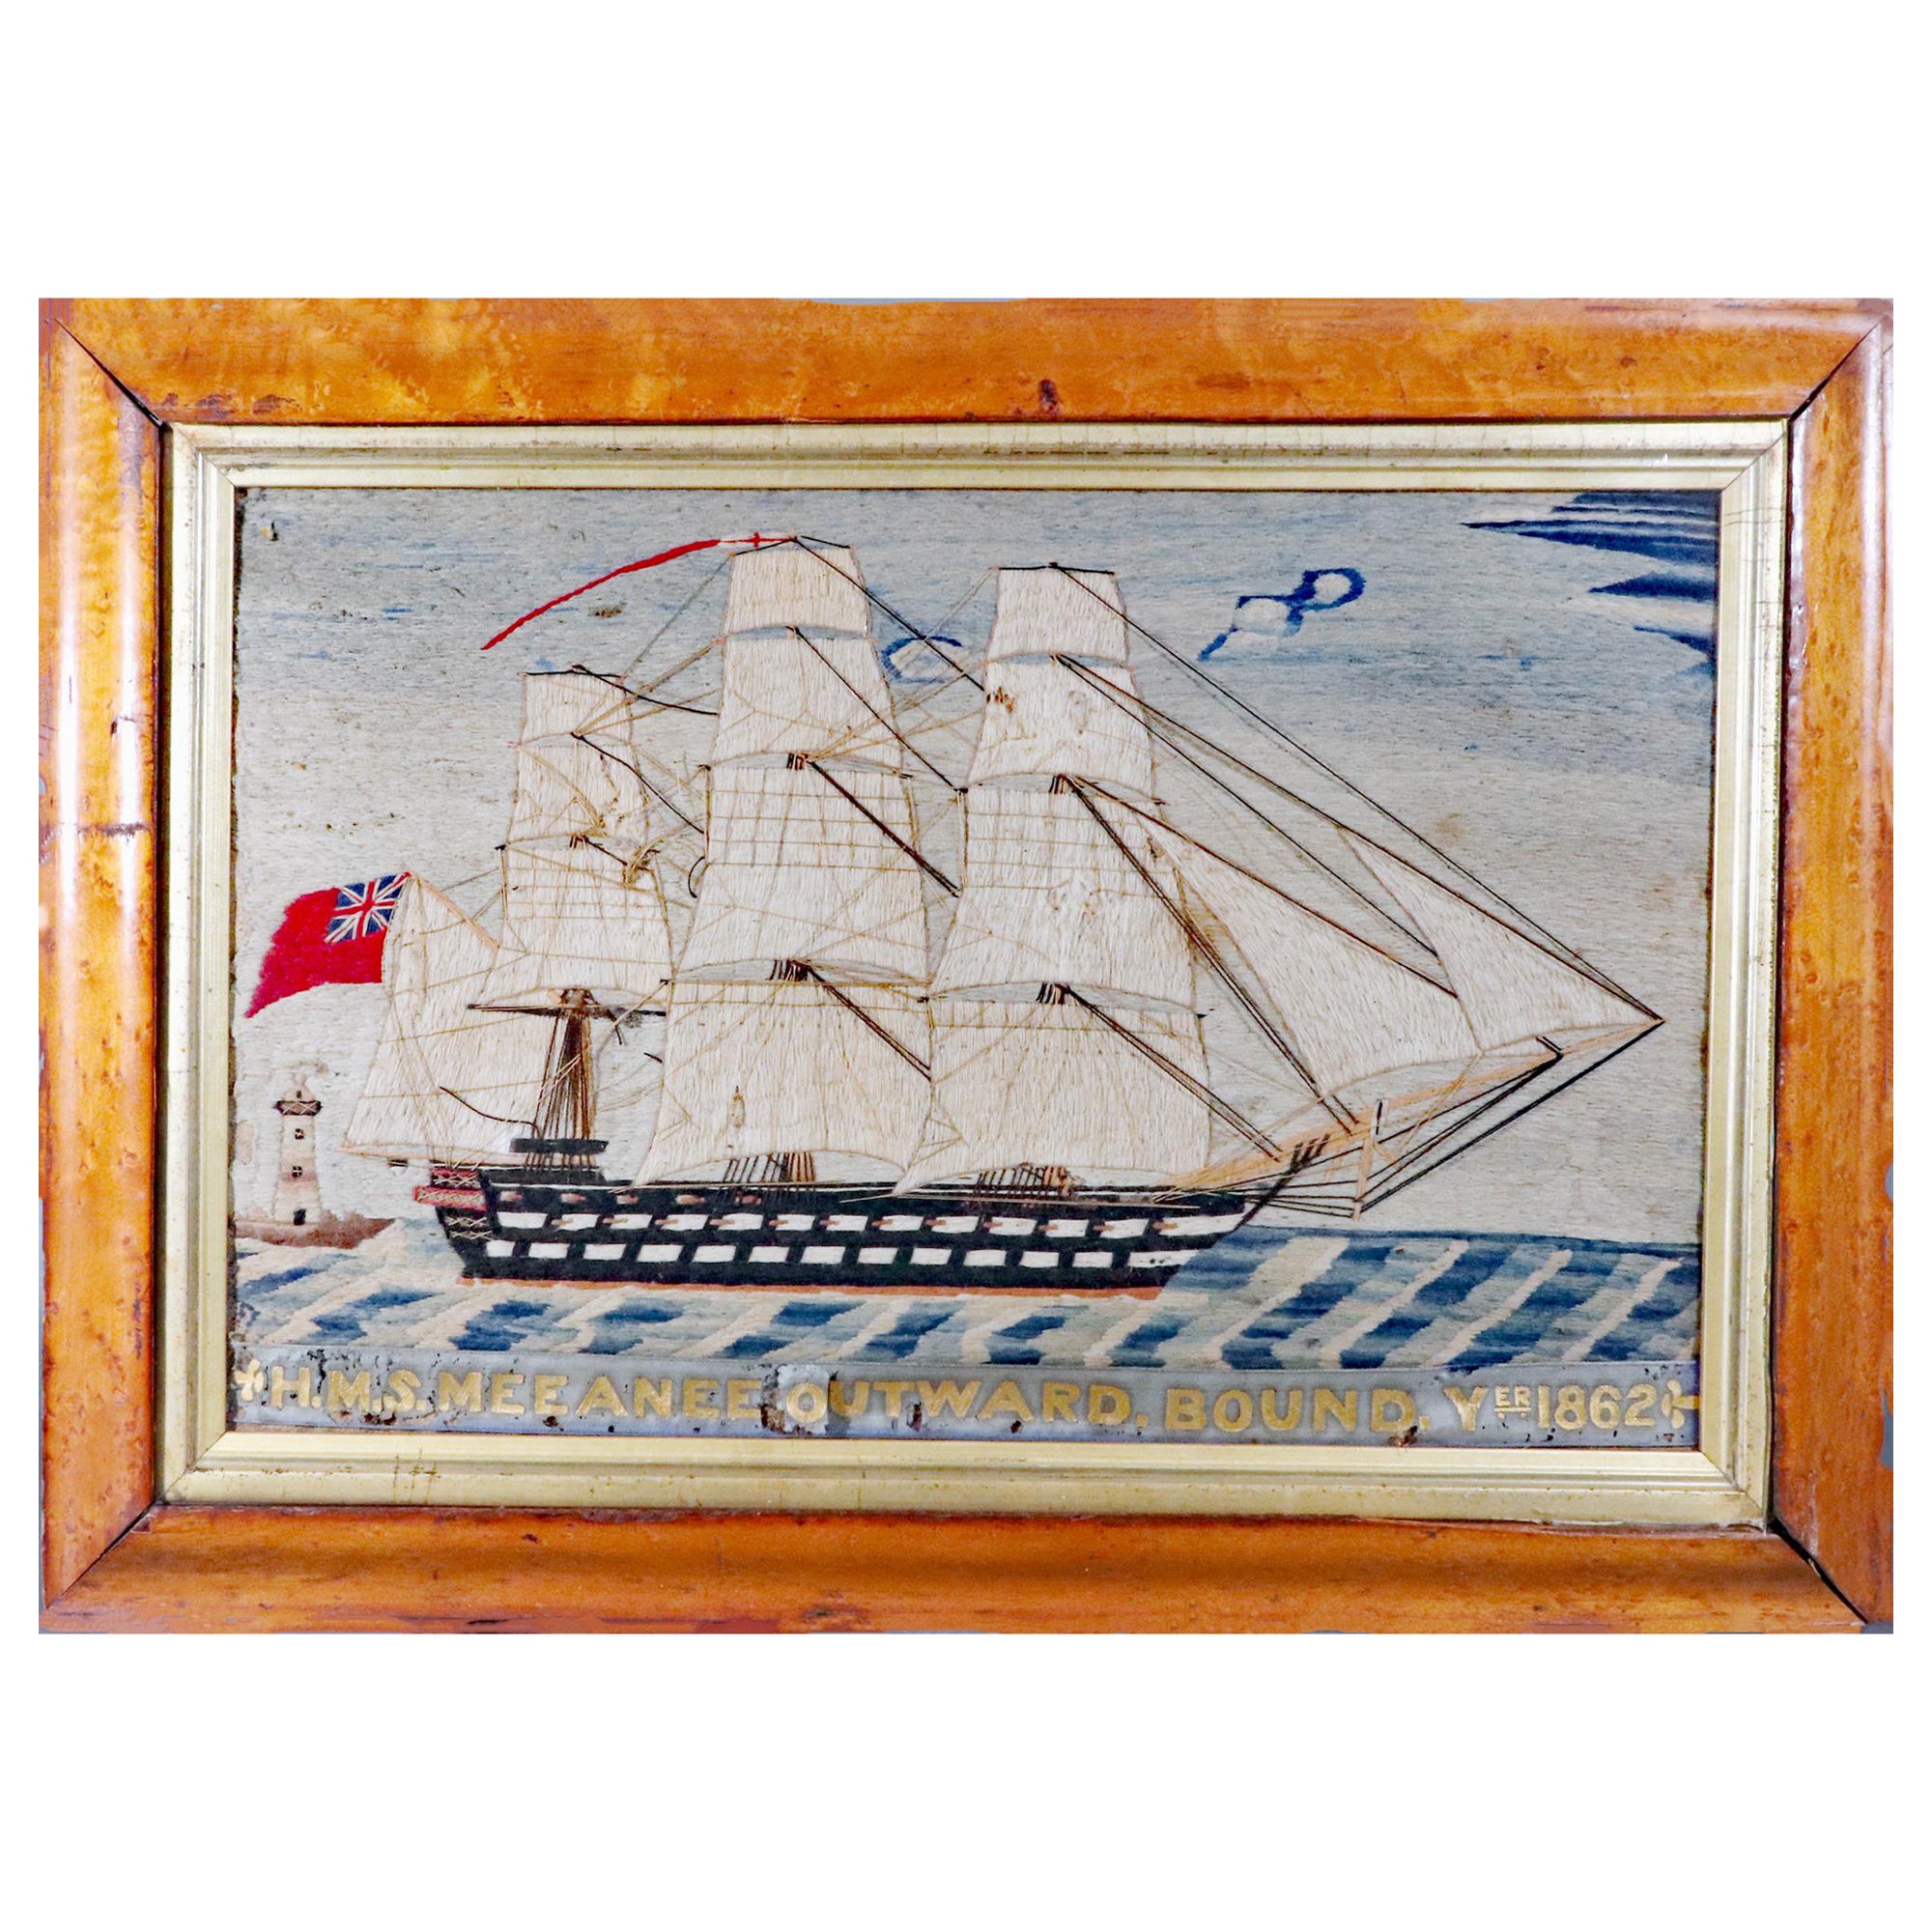 Sailor's Woolwork of HMS Meeanee Outward Bound, Year 1862